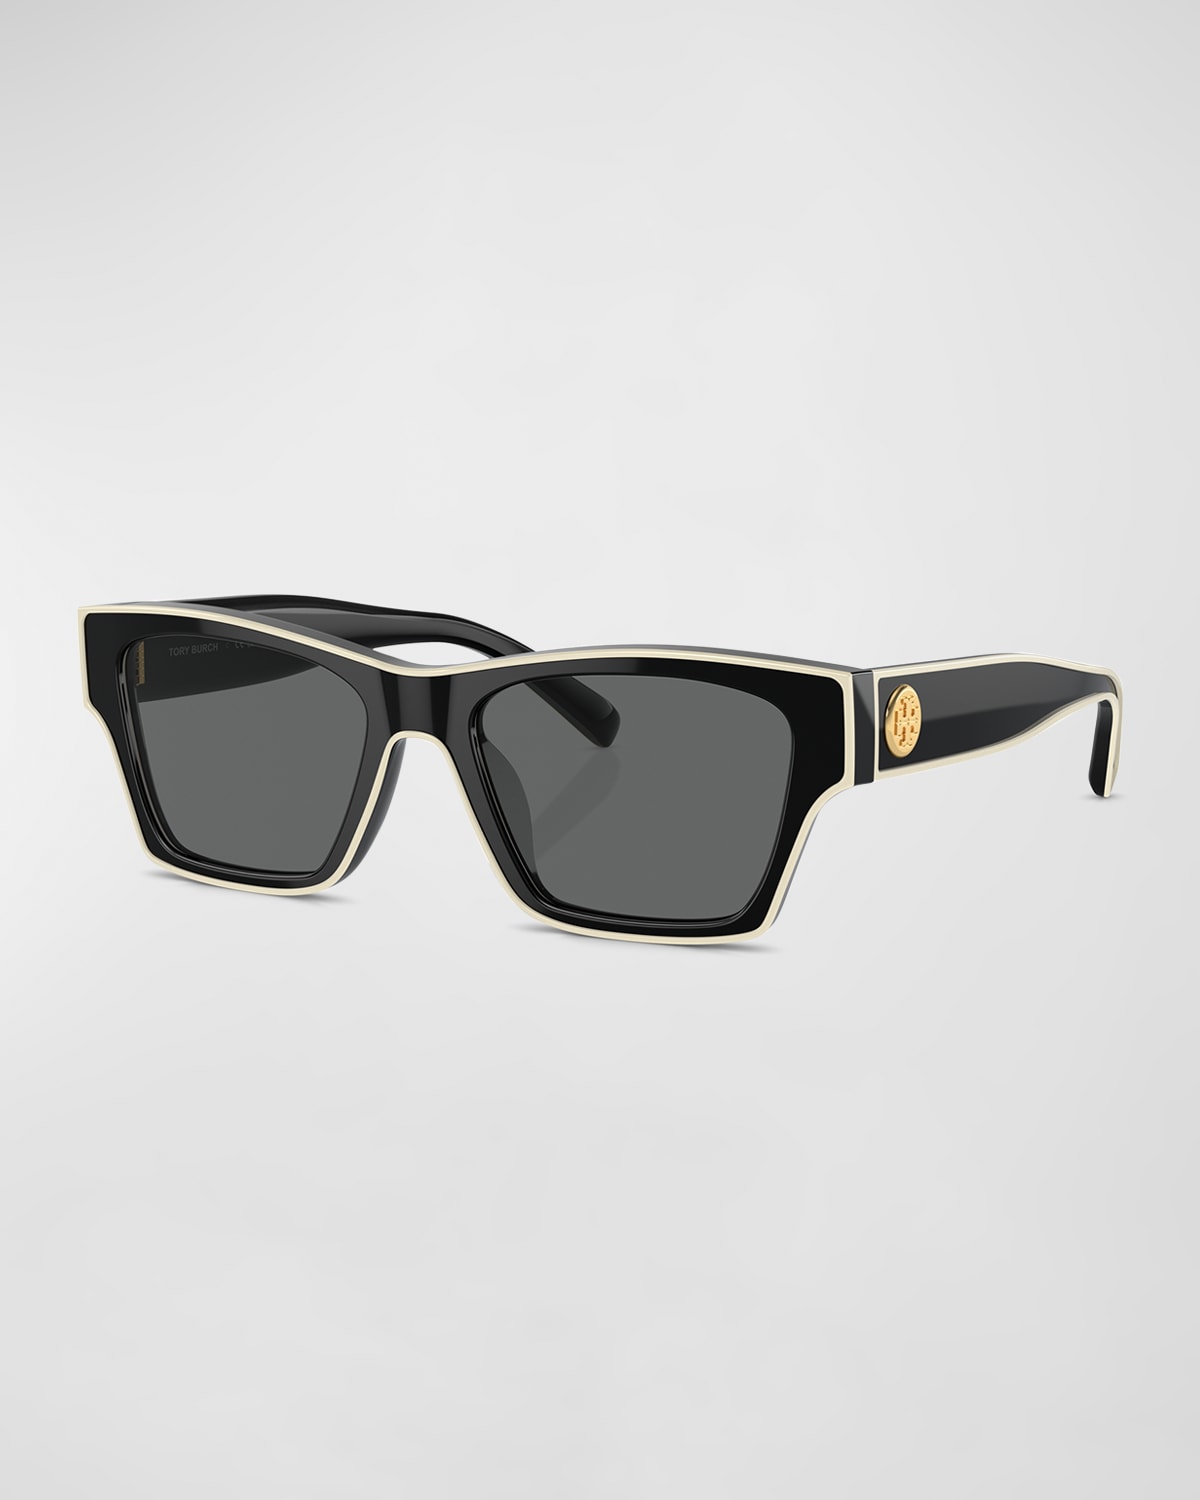 Tory Burch Outlined Rectangle Sunglasses In Black Grey